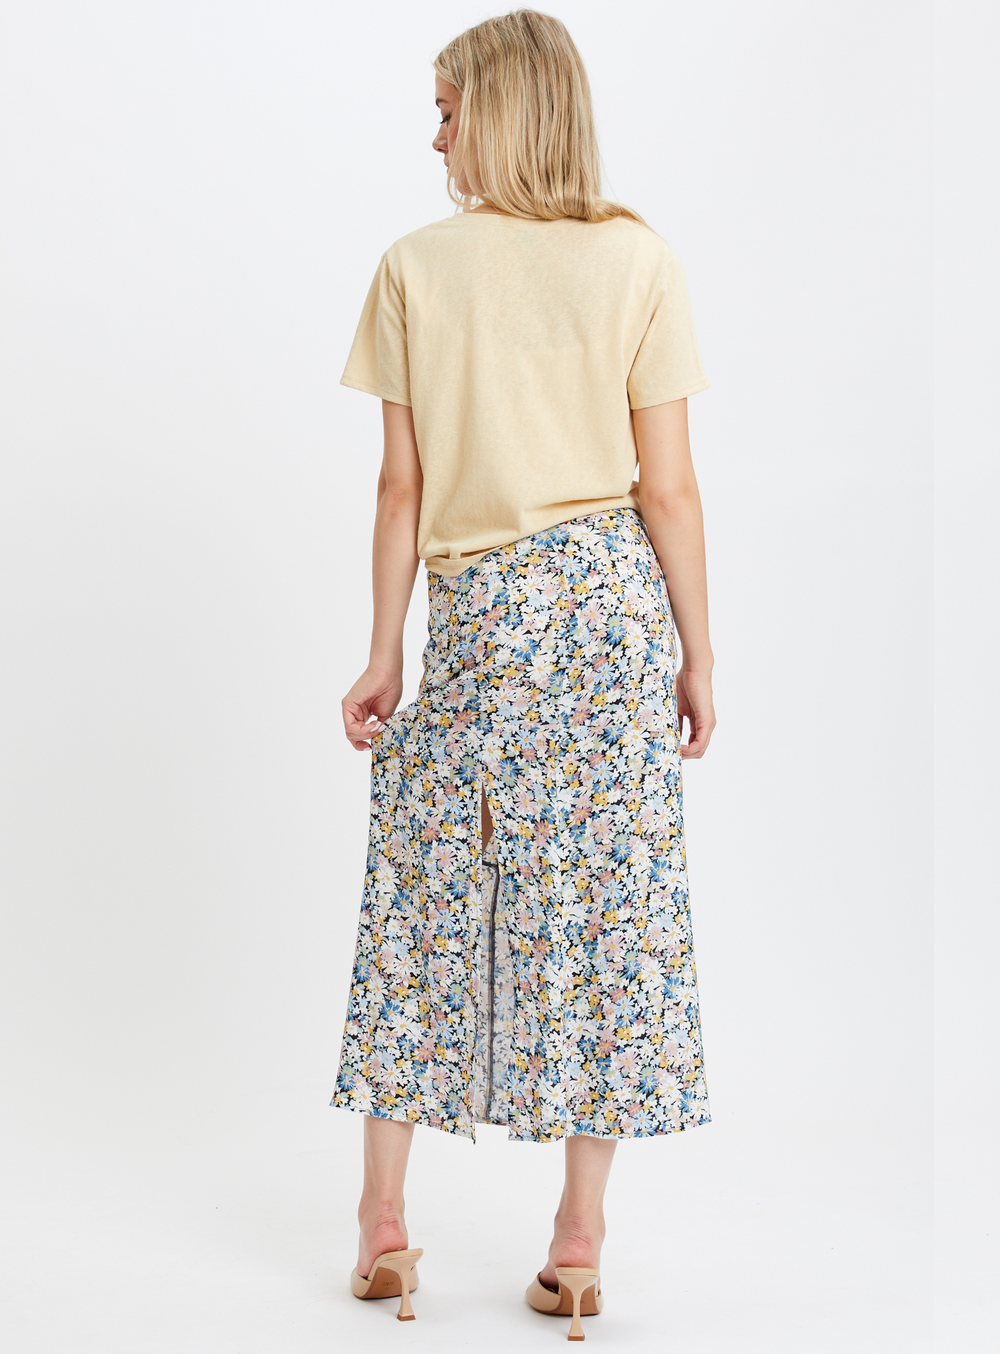 Elegant chiffon fabric flair skirt floral print and plated body